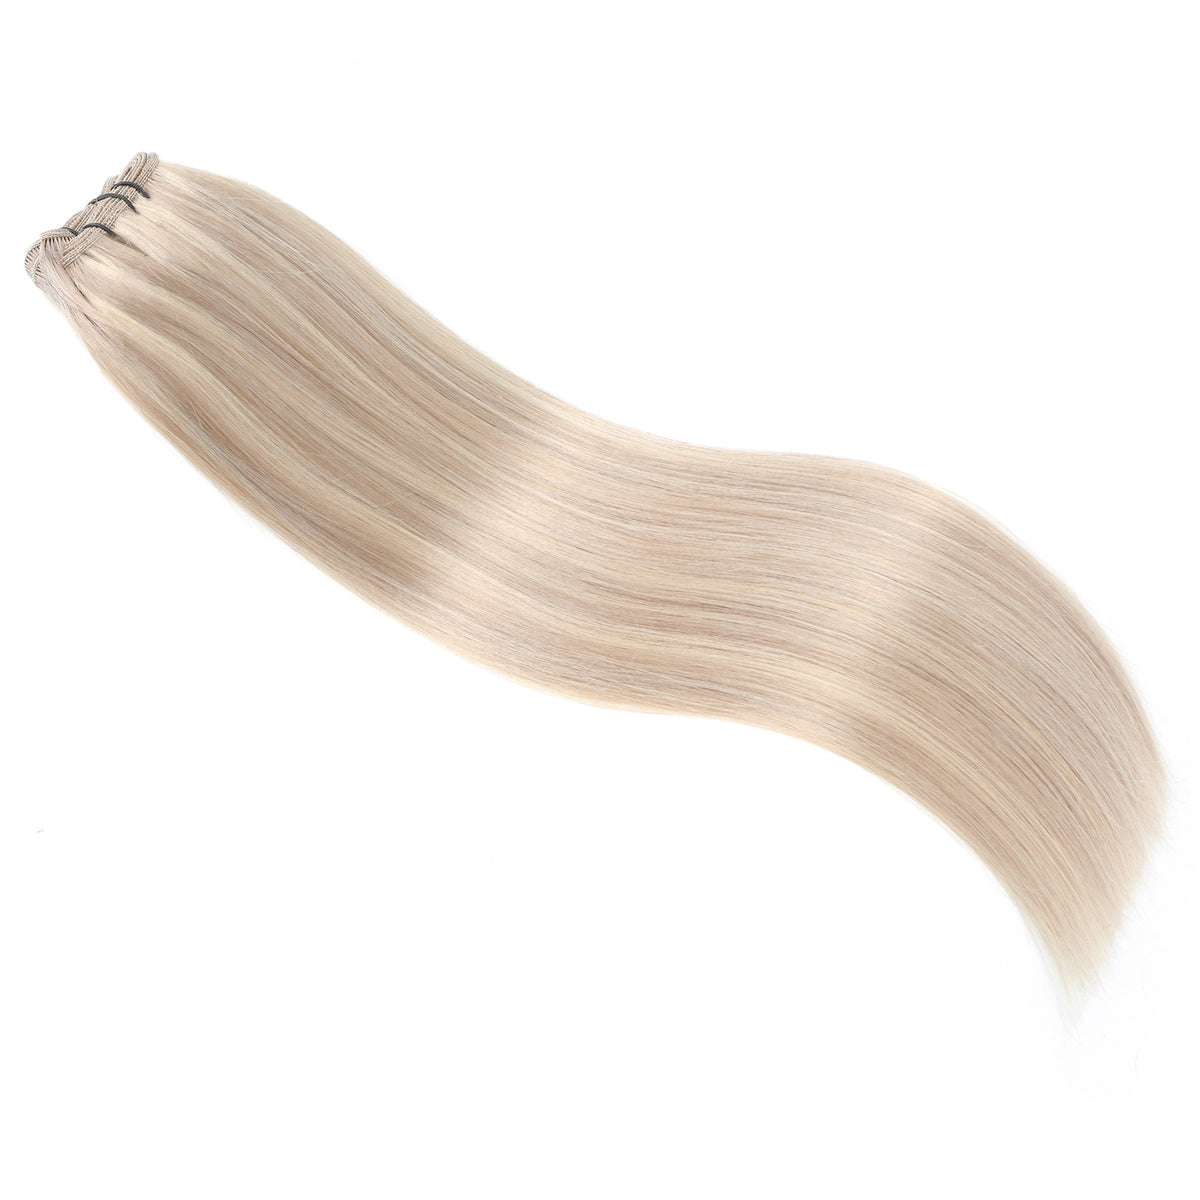 Natural Remy Human Hair Extensions